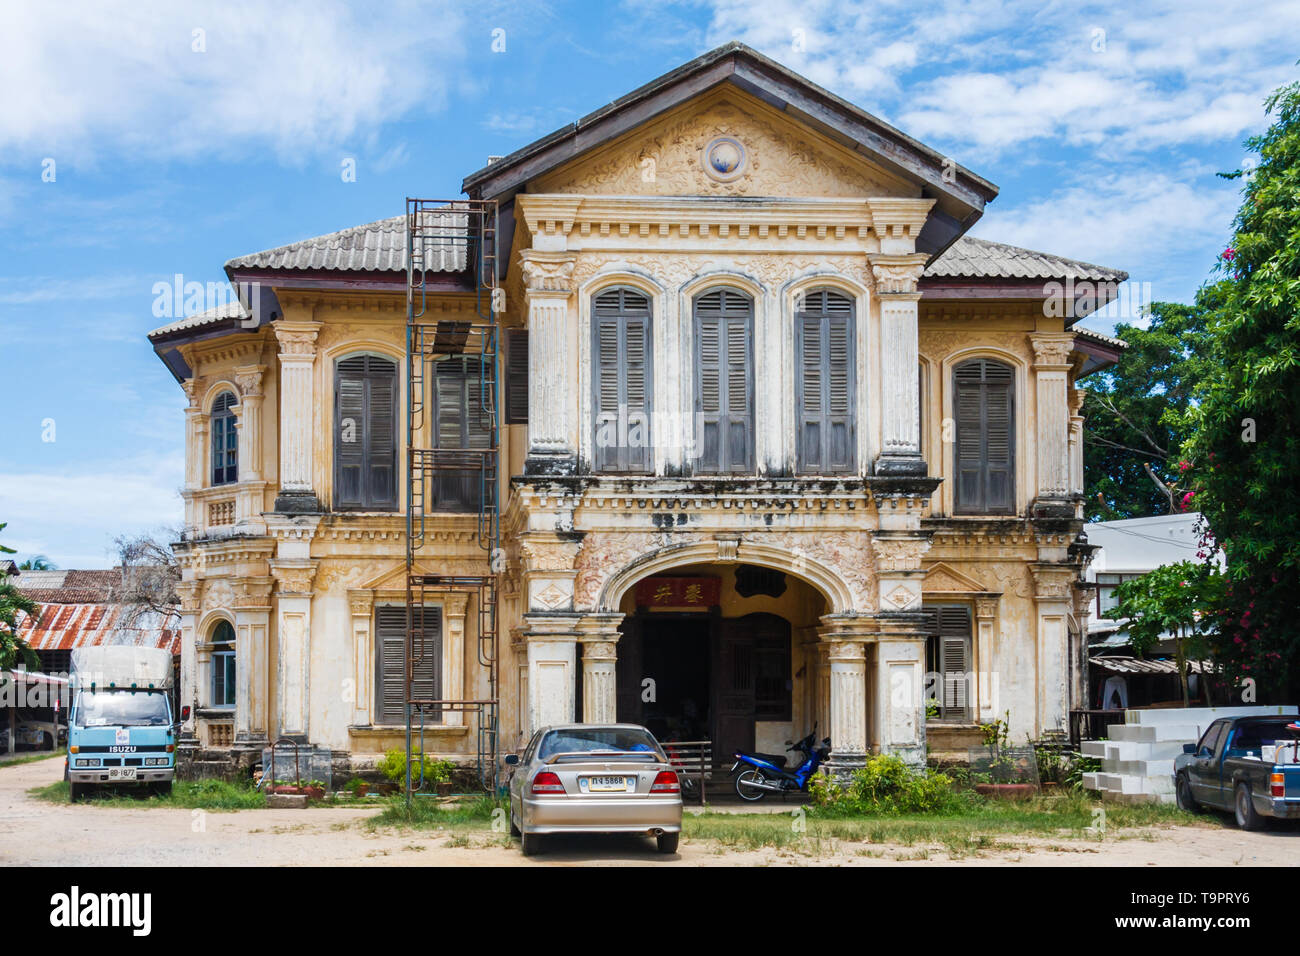 Phuket, Thailand - May 20th 2010: Sino Portuguese architecture. The mansion dates from the early 1900s. Stock Photo